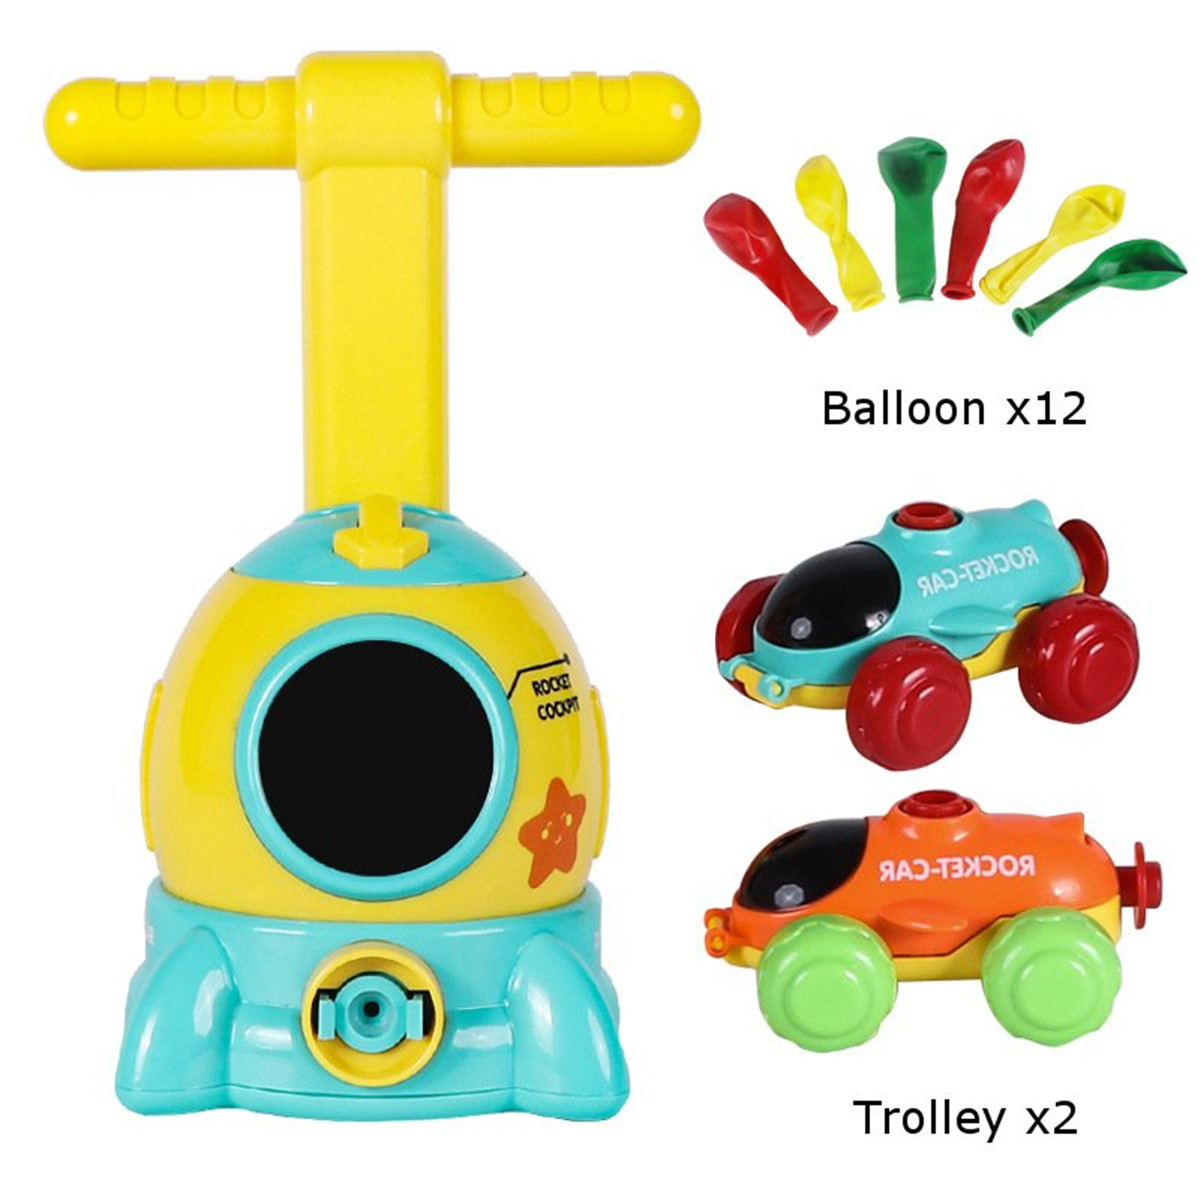 Inertial-Power-Balloon-Car-Intellectual-Development-Learning-Education-Science-Experiment-Toy-for-Ki-1698287-9